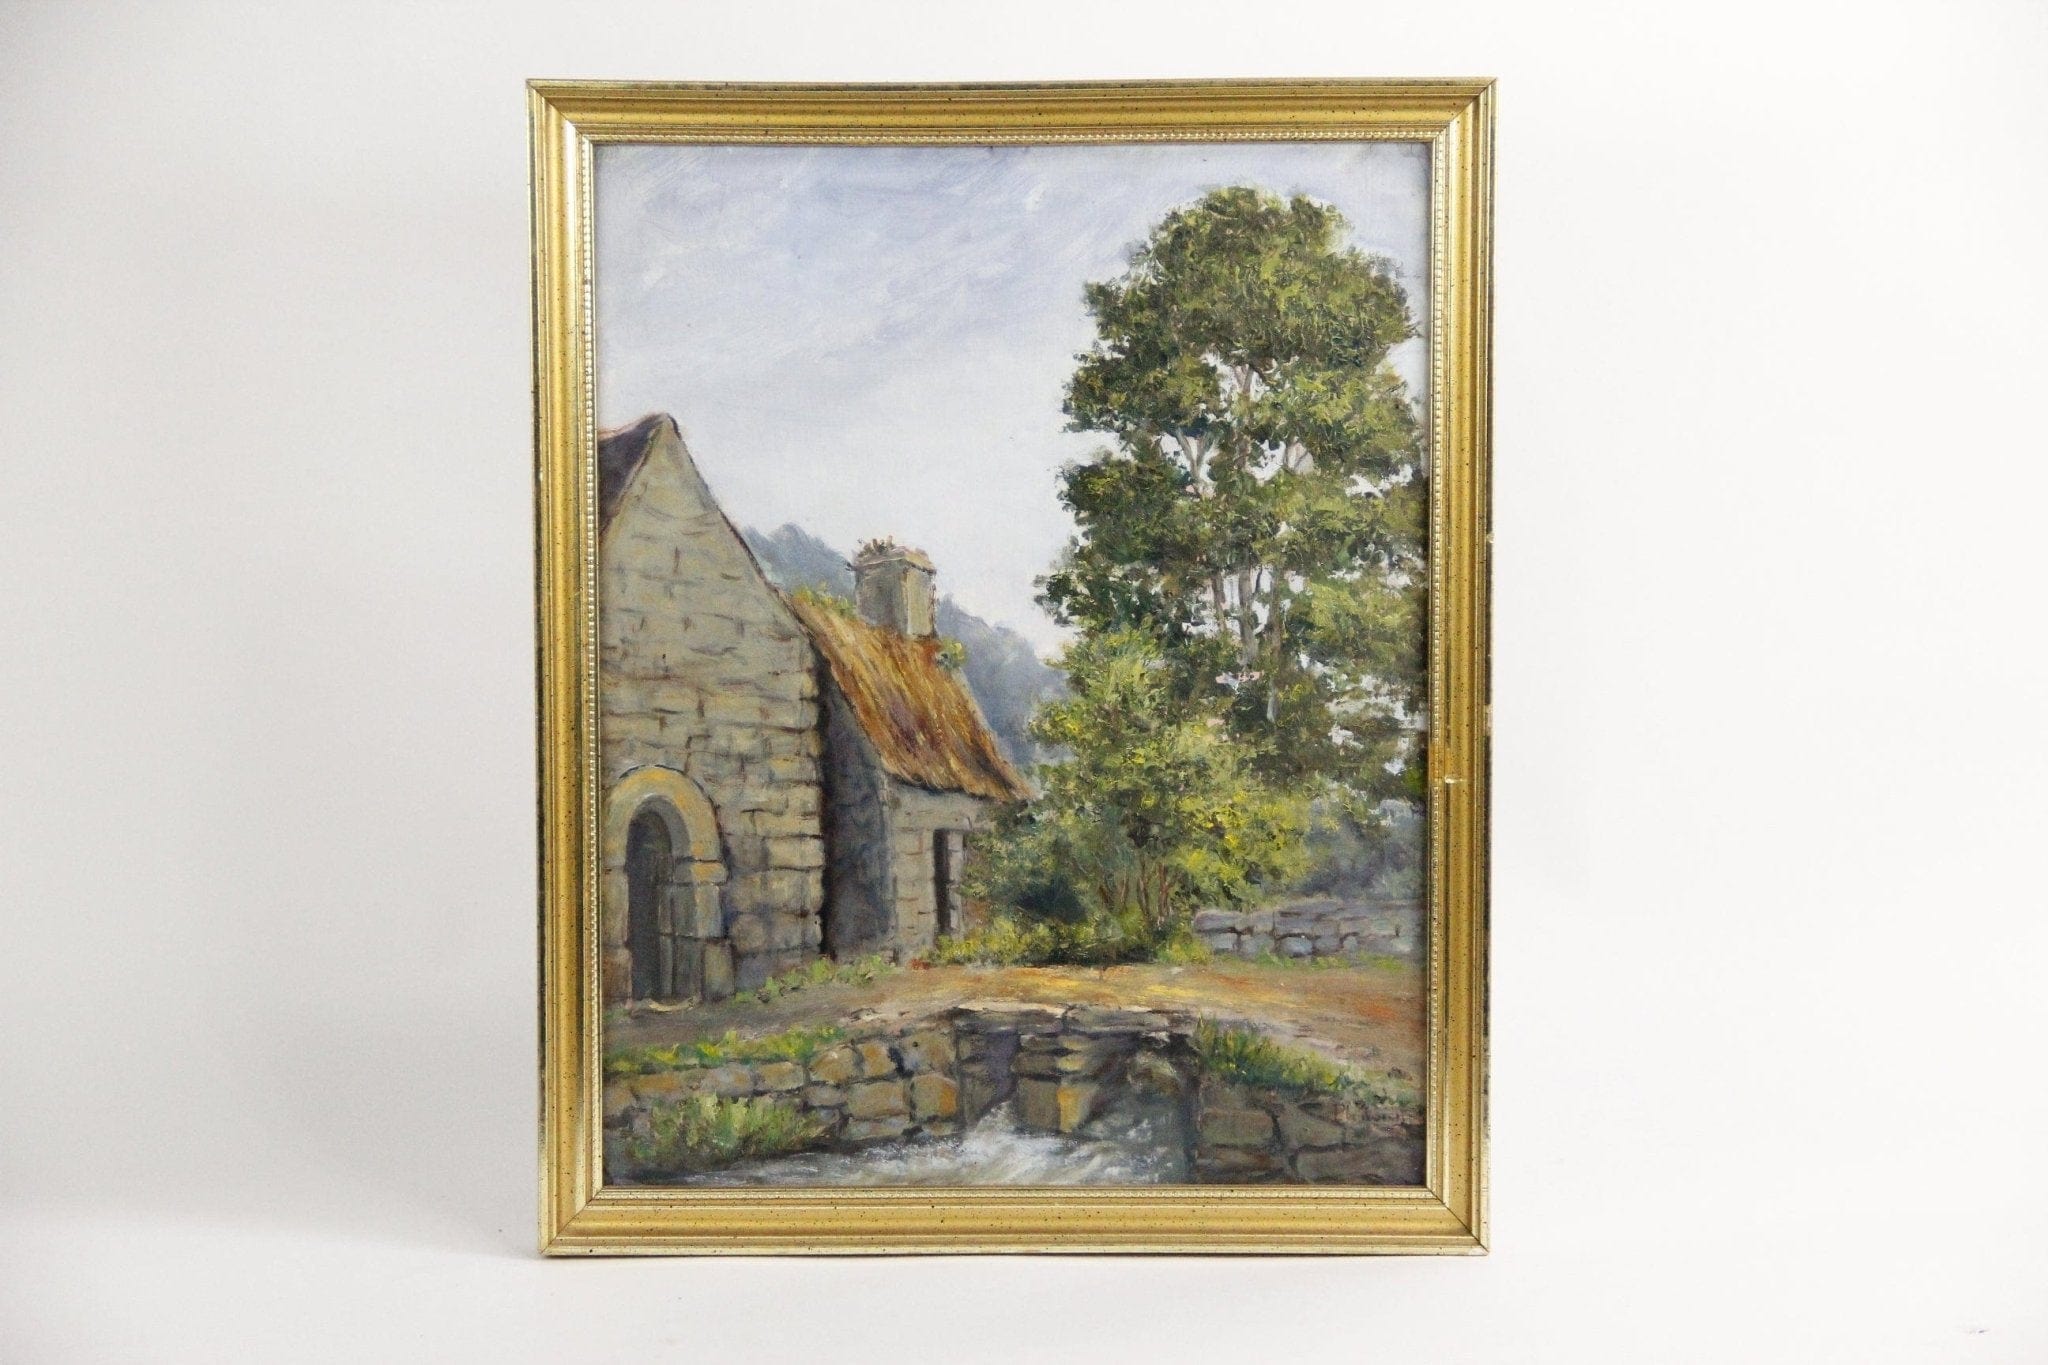 Antique French Painting | Landscape - Debra Hall Lifestyle